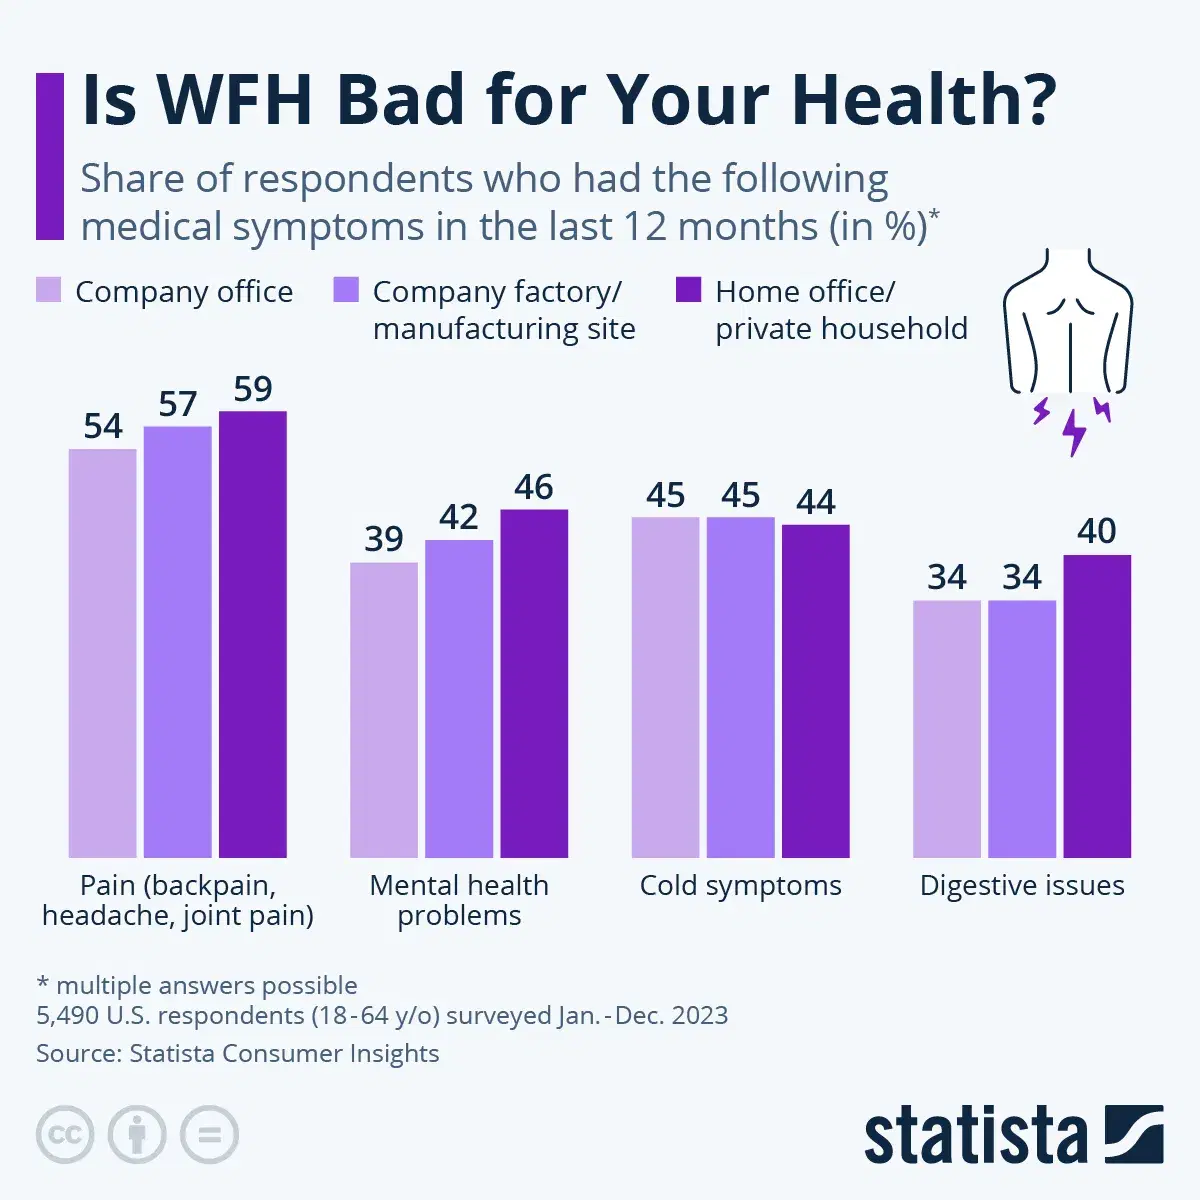 Is WFH Bad for Your Health?